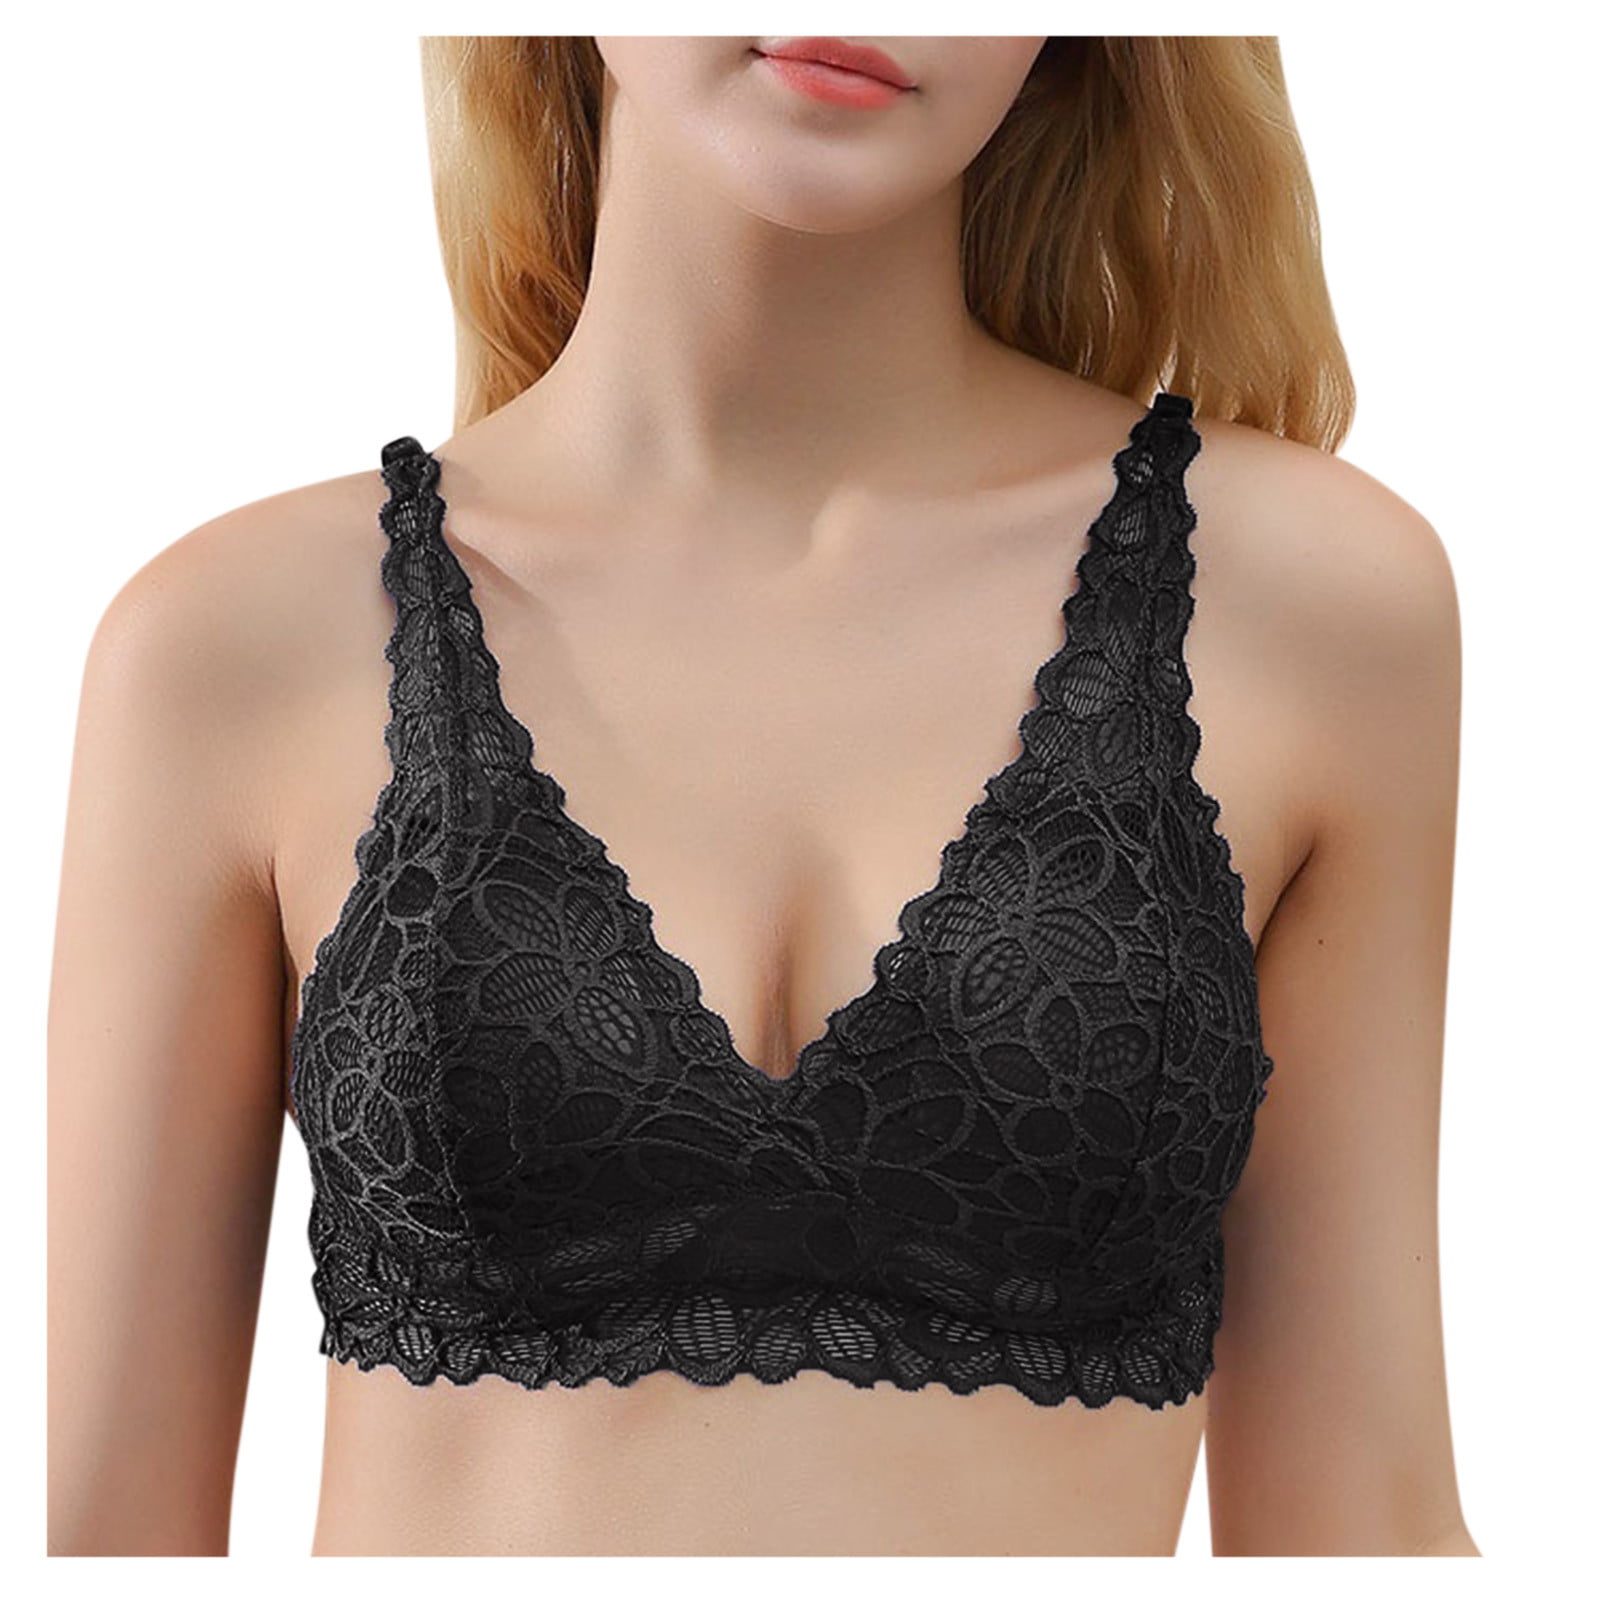 Bras Women S Underwear Without Steel Ring Big Breast Show Small And Thin  Push Up Anti SAG Adjustable Lace Sexy Bra From 15,85 €